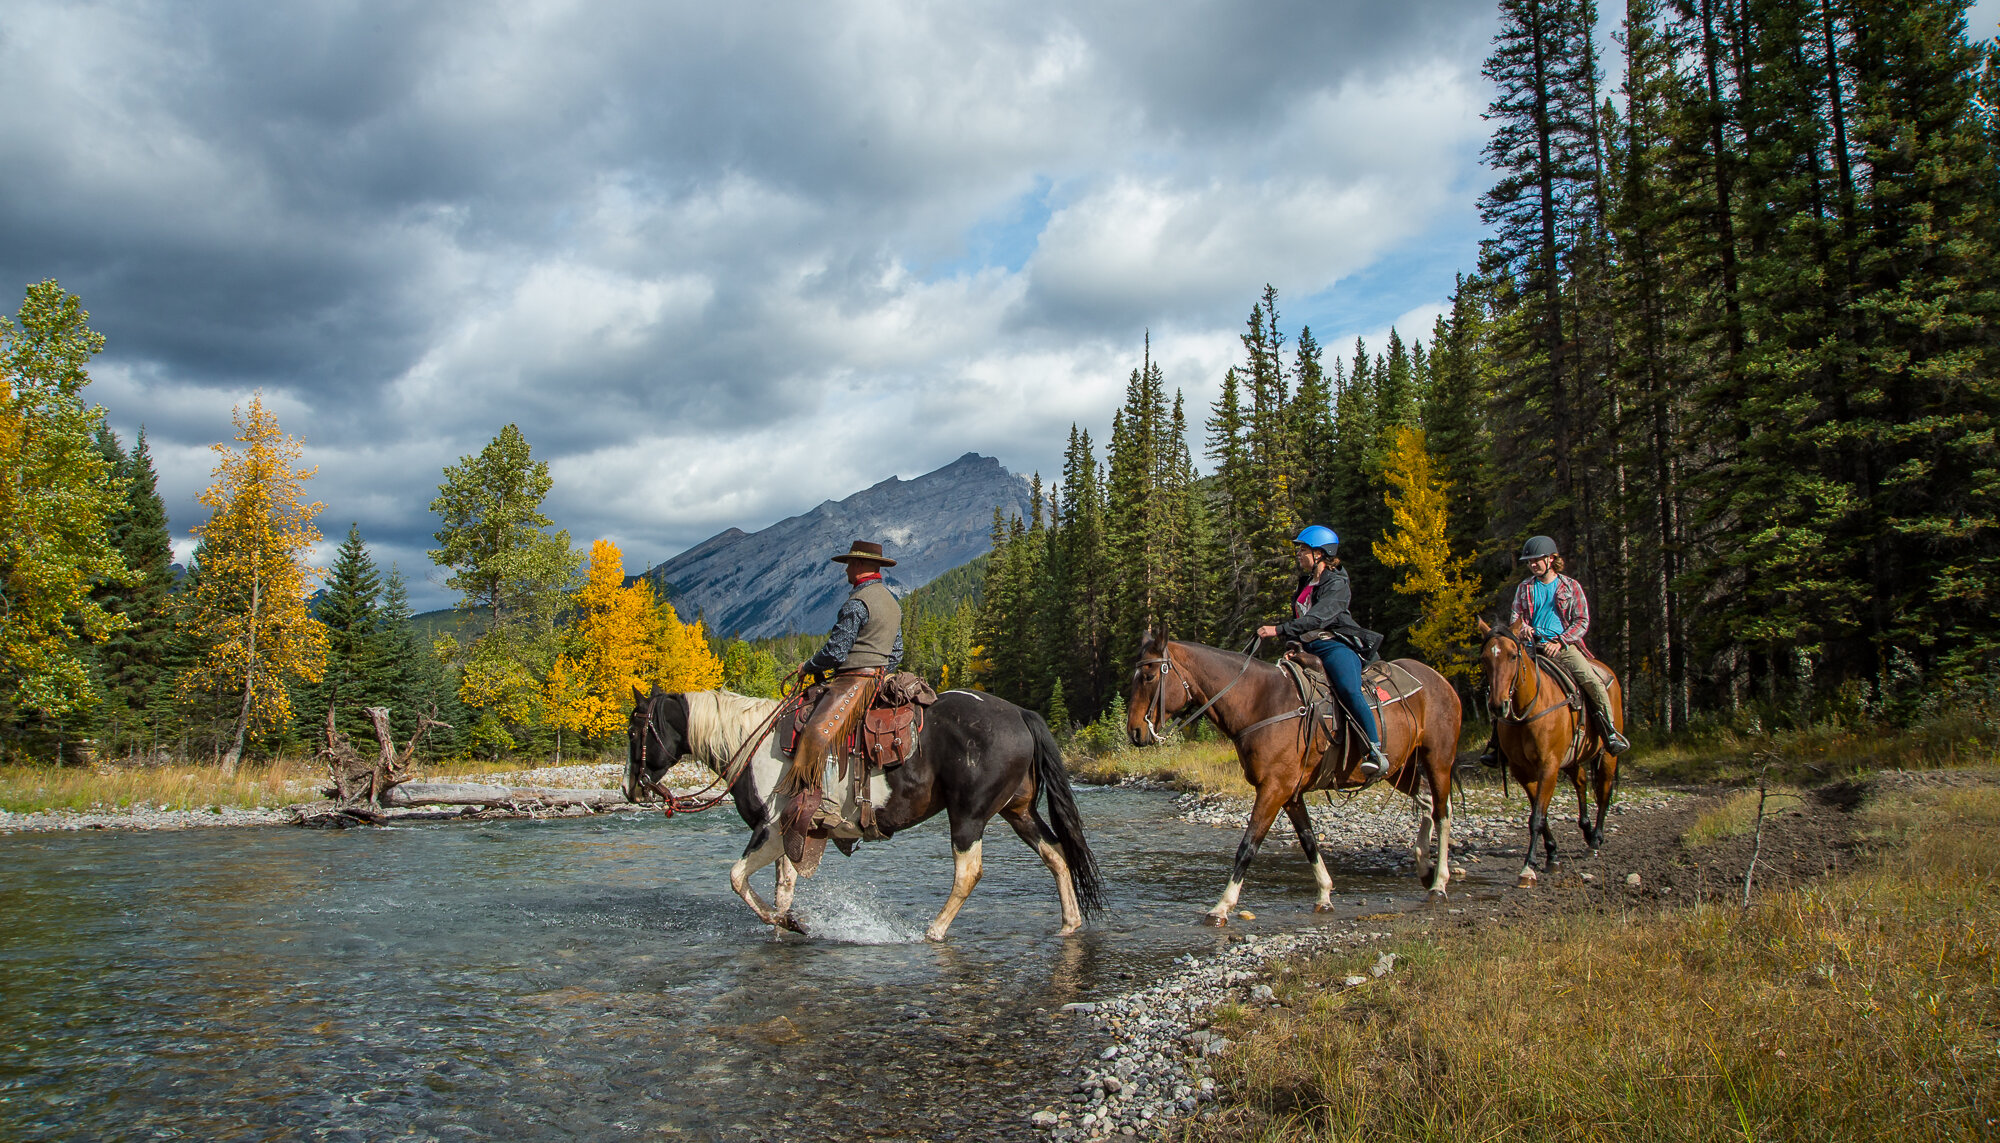 Horses crossing the Spray River in Banff